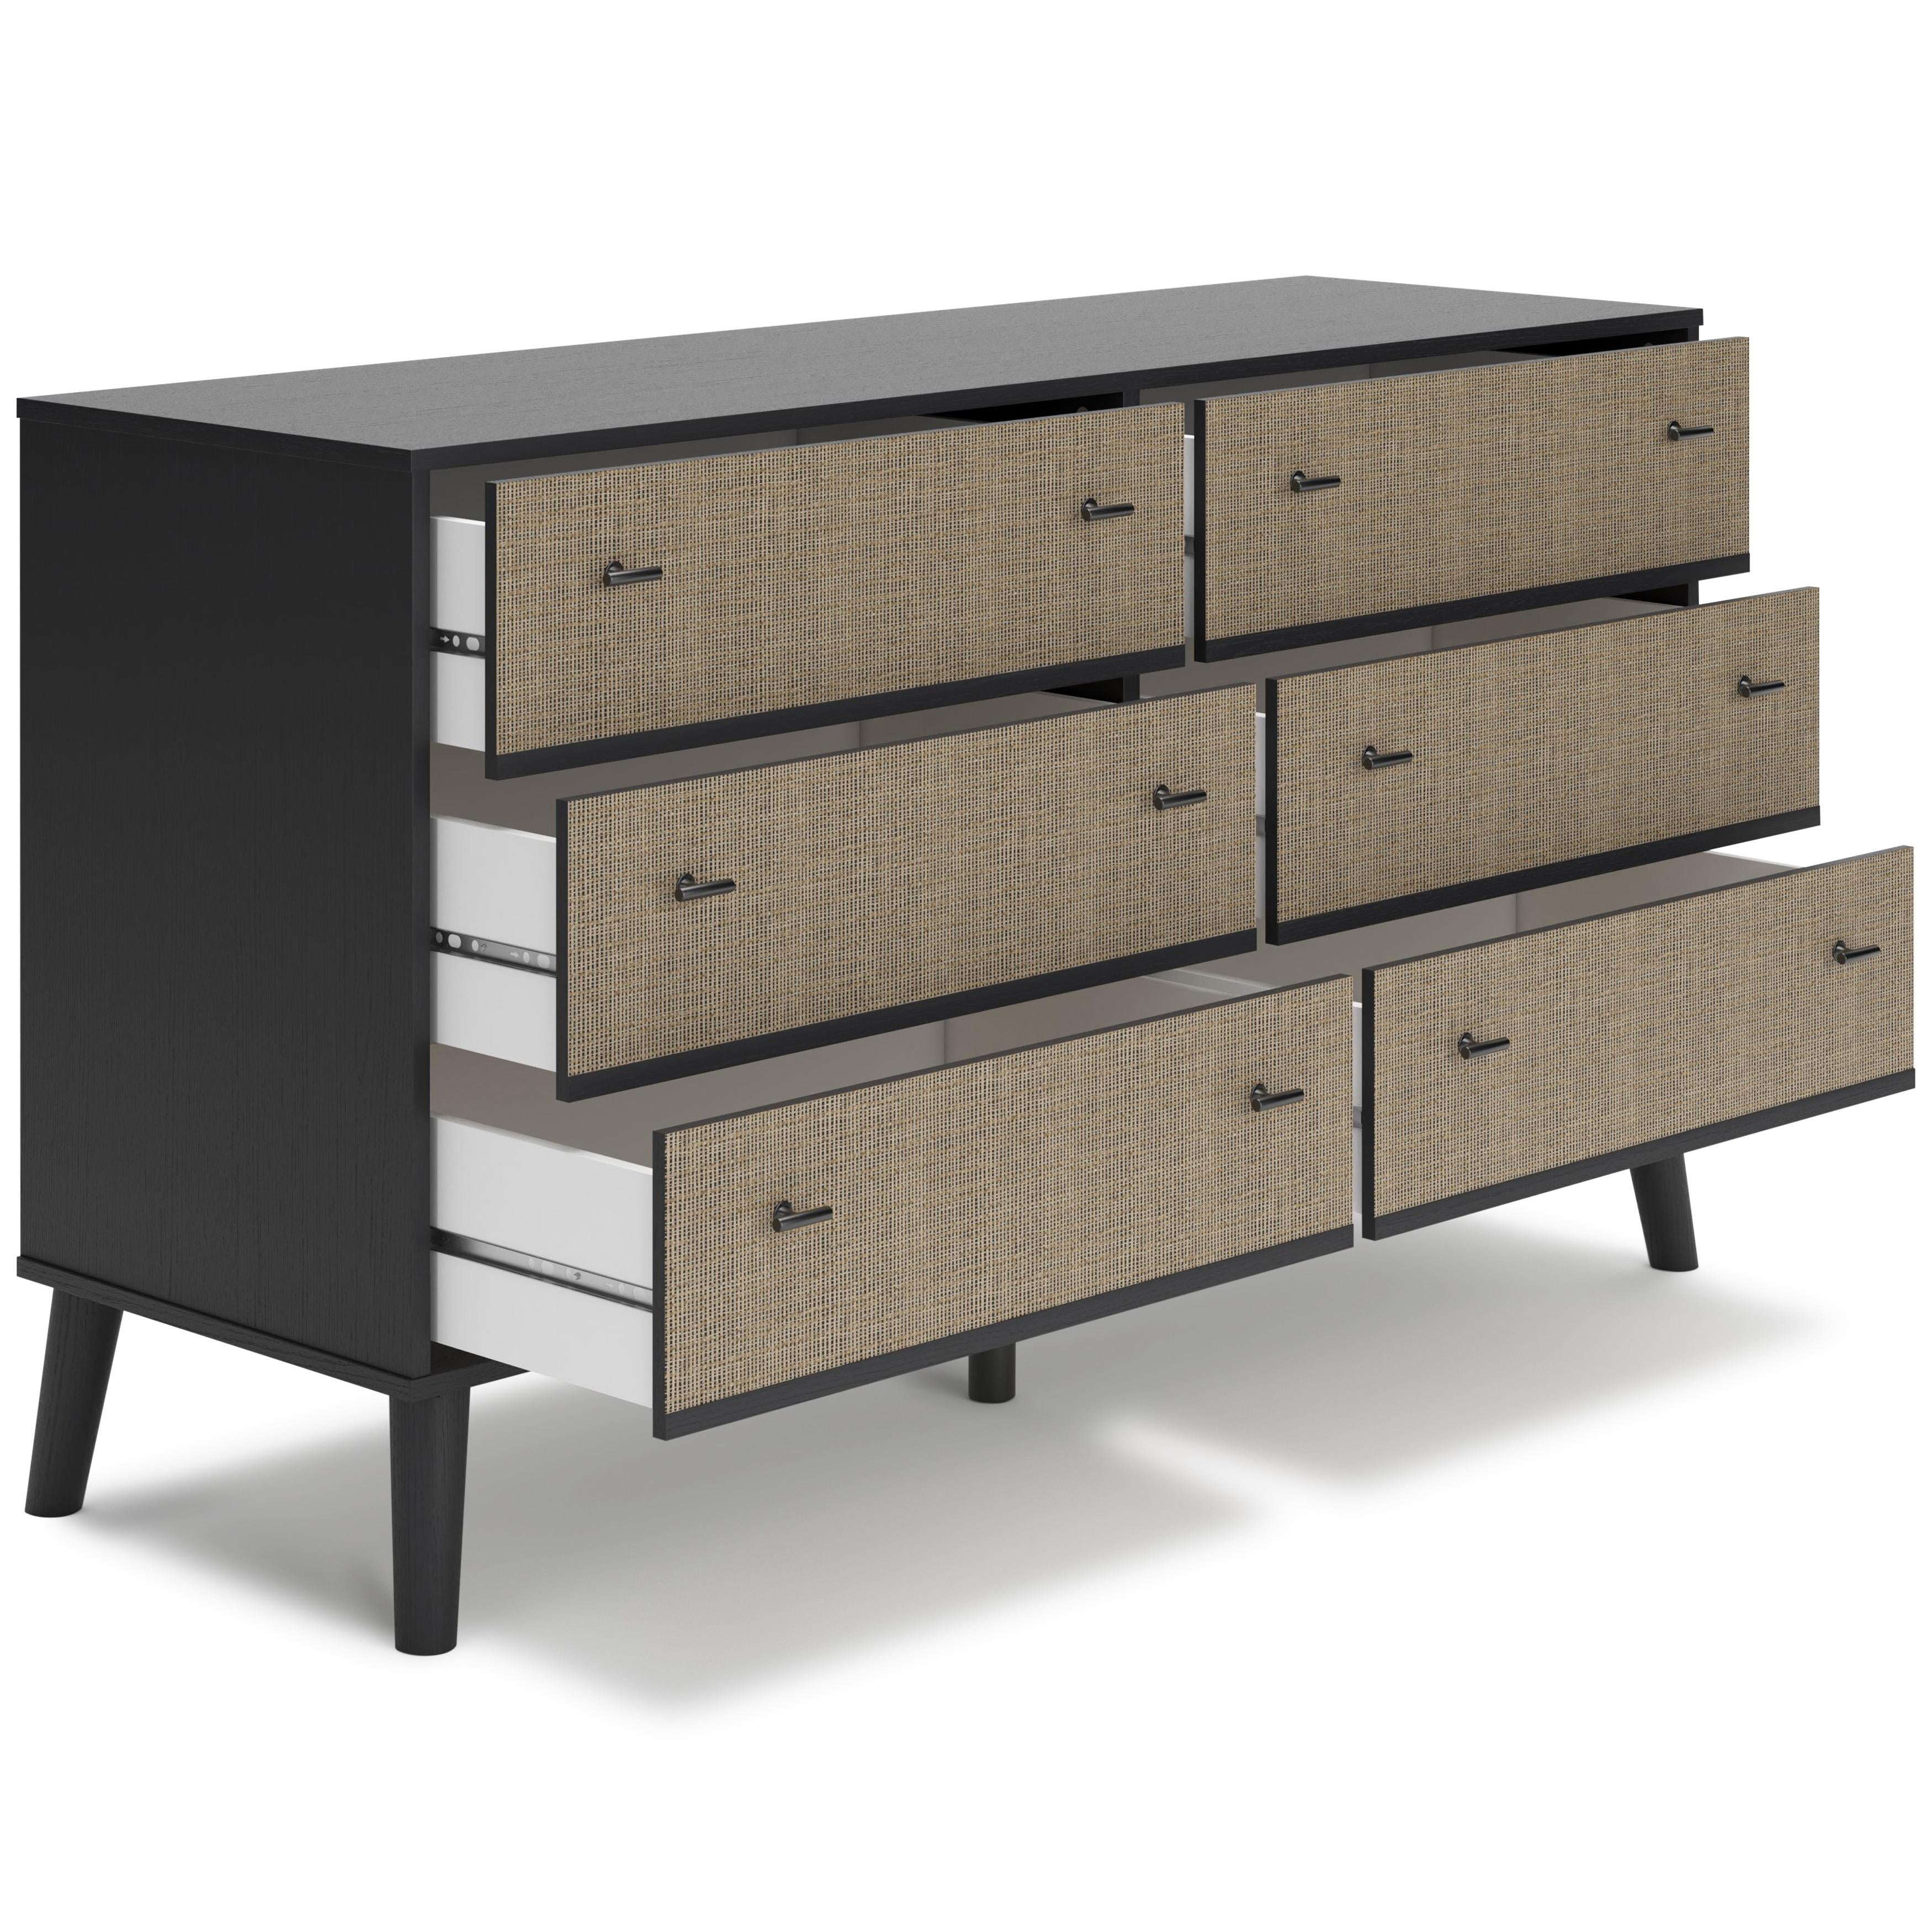 Signature Design by Ashley Charlang 6-Drawer Dresser EB1198-231 IMAGE 2